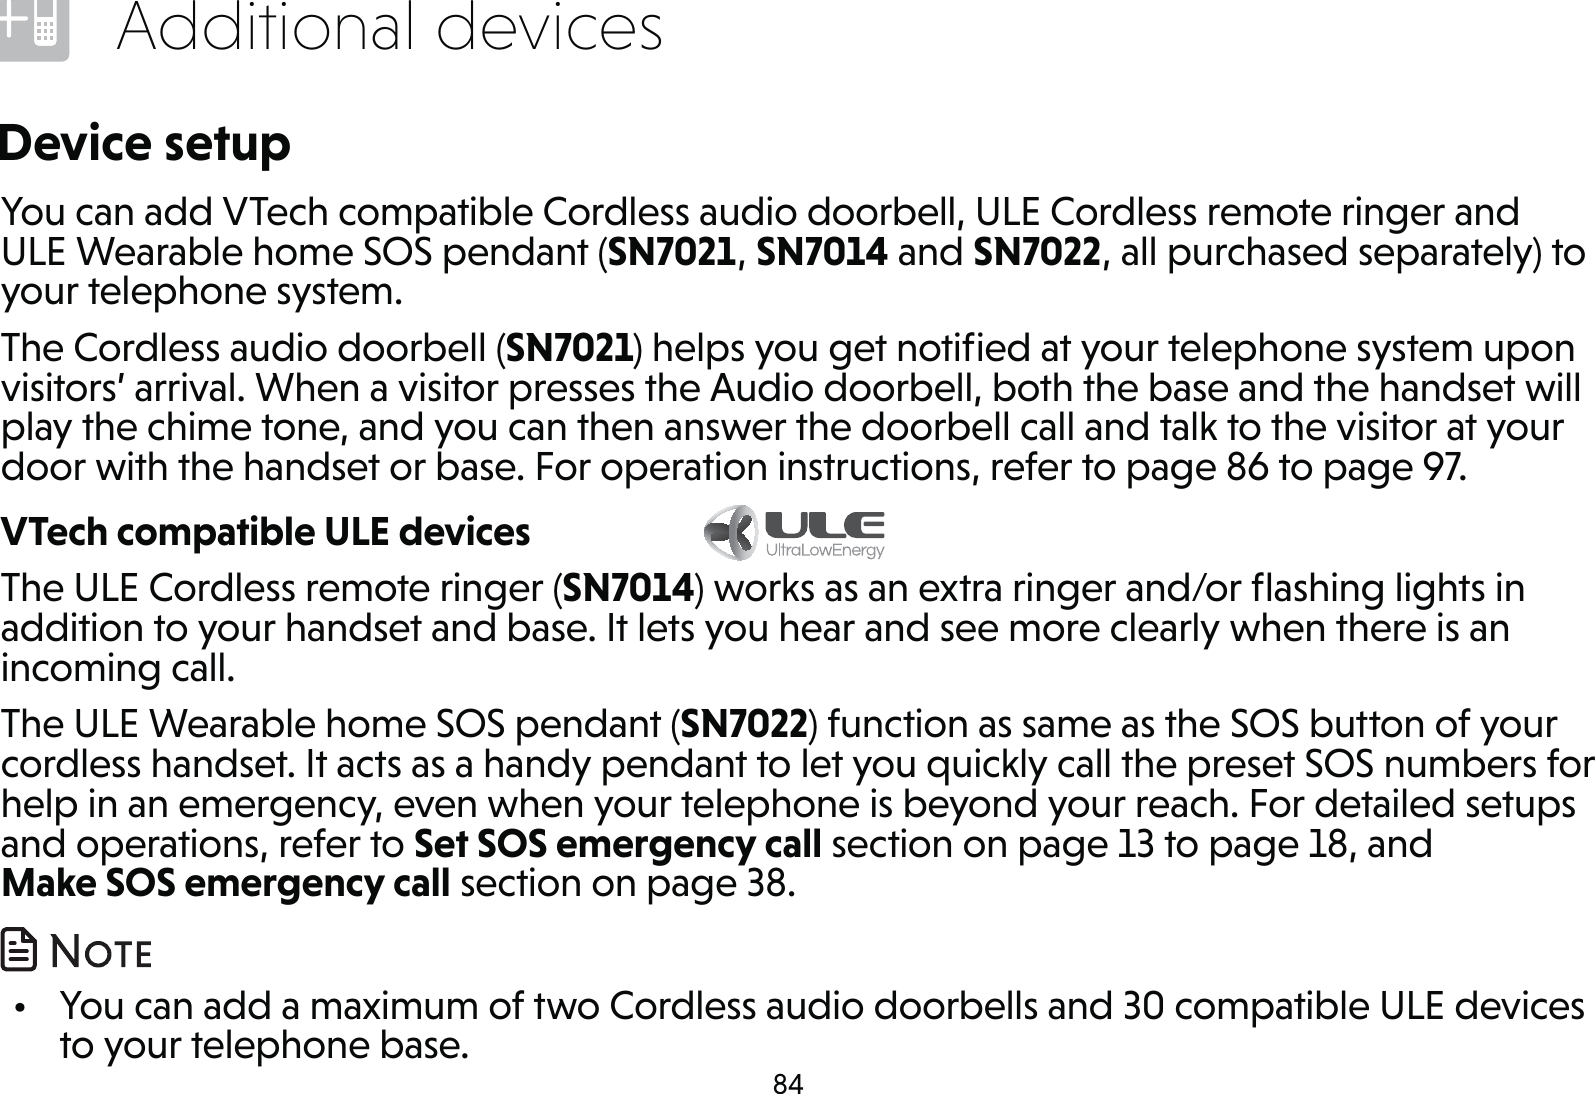 84Additional devicesDevice setupYou can add VTech compatible Cordless audio doorbell, ULE Cordless remote ringer and ULE Wearable home SOS pendant (SN7021, SN7014 and SN7022, all purchased separately) to your telephone system.The Cordless audio doorbell (SN7021) helps you get notiﬁed at your telephone system upon visitors’ arrival. When a visitor presses the Audio doorbell, both the base and the handset will play the chime tone, and you can then answer the doorbell call and talk to the visitor at your door with the handset or base. For operation instructions, refer to page 86 to page 97.VTech compatible ULE devices             The ULE Cordless remote ringer (SN7014) works as an extra ringer and/or ﬂashing lights in addition to your handset and base. It lets you hear and see more clearly when there is an incoming call.The ULE Wearable home SOS pendant (SN7022) function as same as the SOS button of your cordless handset. It acts as a handy pendant to let you quickly call the preset SOS numbers for help in an emergency, even when your telephone is beyond your reach. For detailed setups and operations, refer to Set SOS emergency call section on page 13 to page 18, and Make SOS emergency call section on page 38.  •  You can add a maximum of two Cordless audio doorbells and 30 compatible ULE devices to your telephone base.